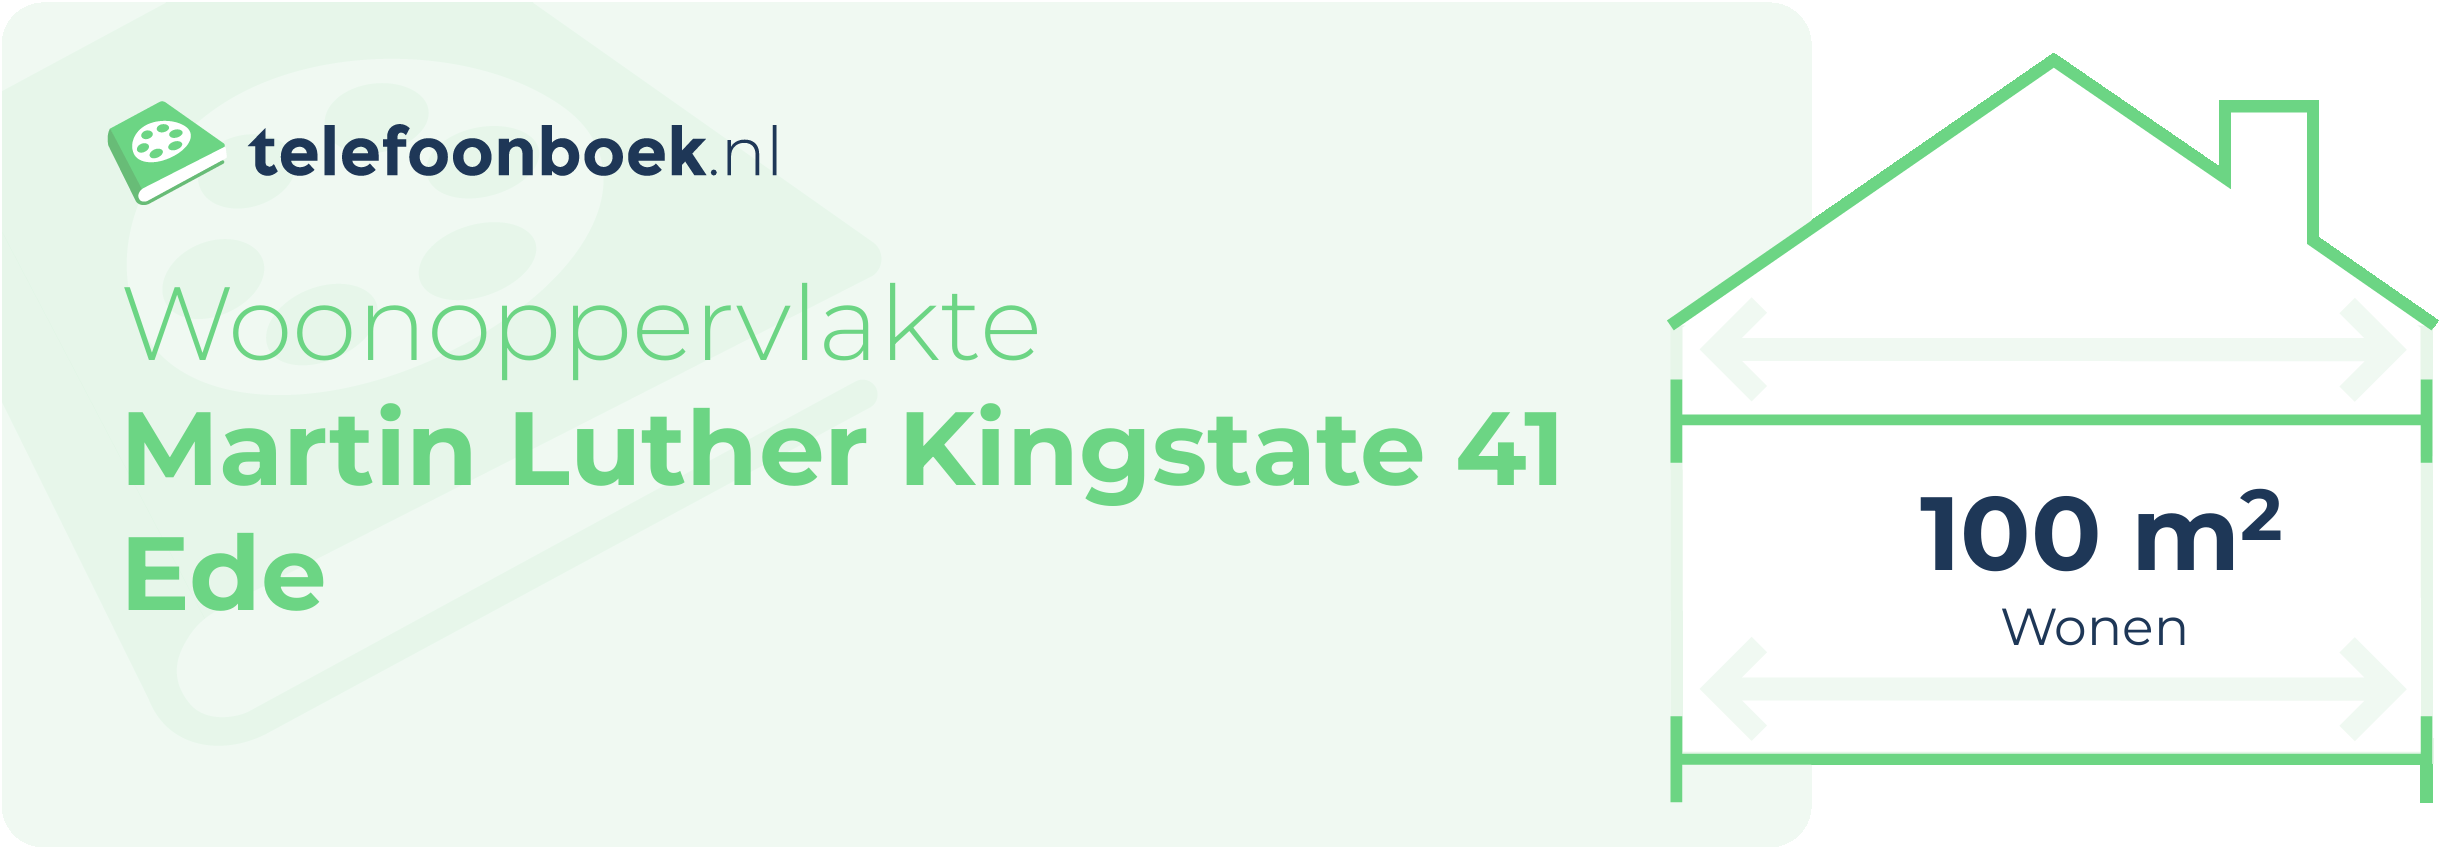 Woonoppervlakte Martin Luther Kingstate 41 Ede